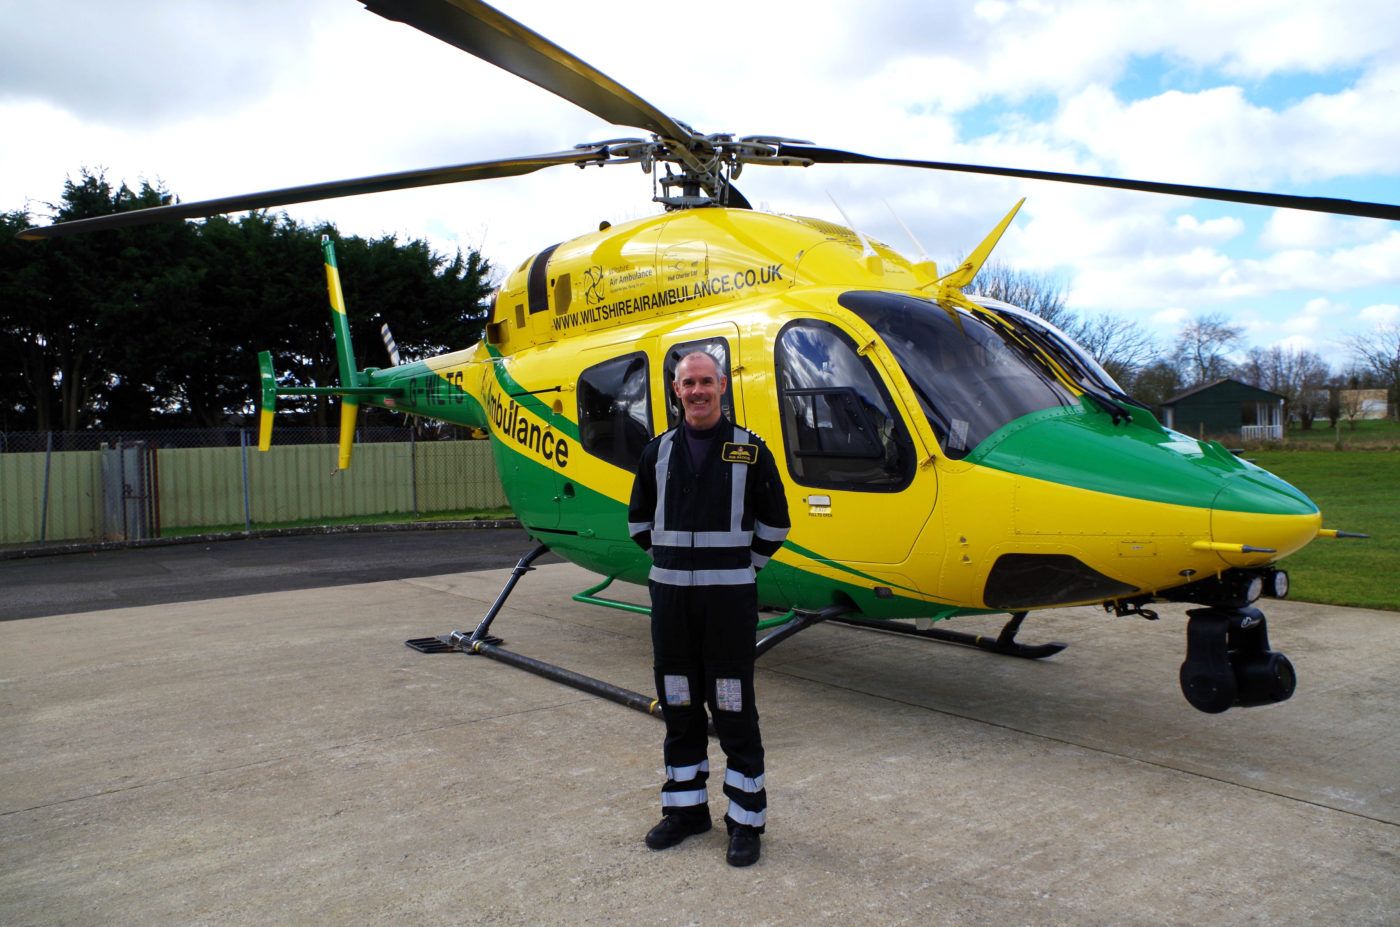 Backus has been a helicopter pilot for 19 years and has flown 3,400 hours. Wiltshire Air Ambulance Photo